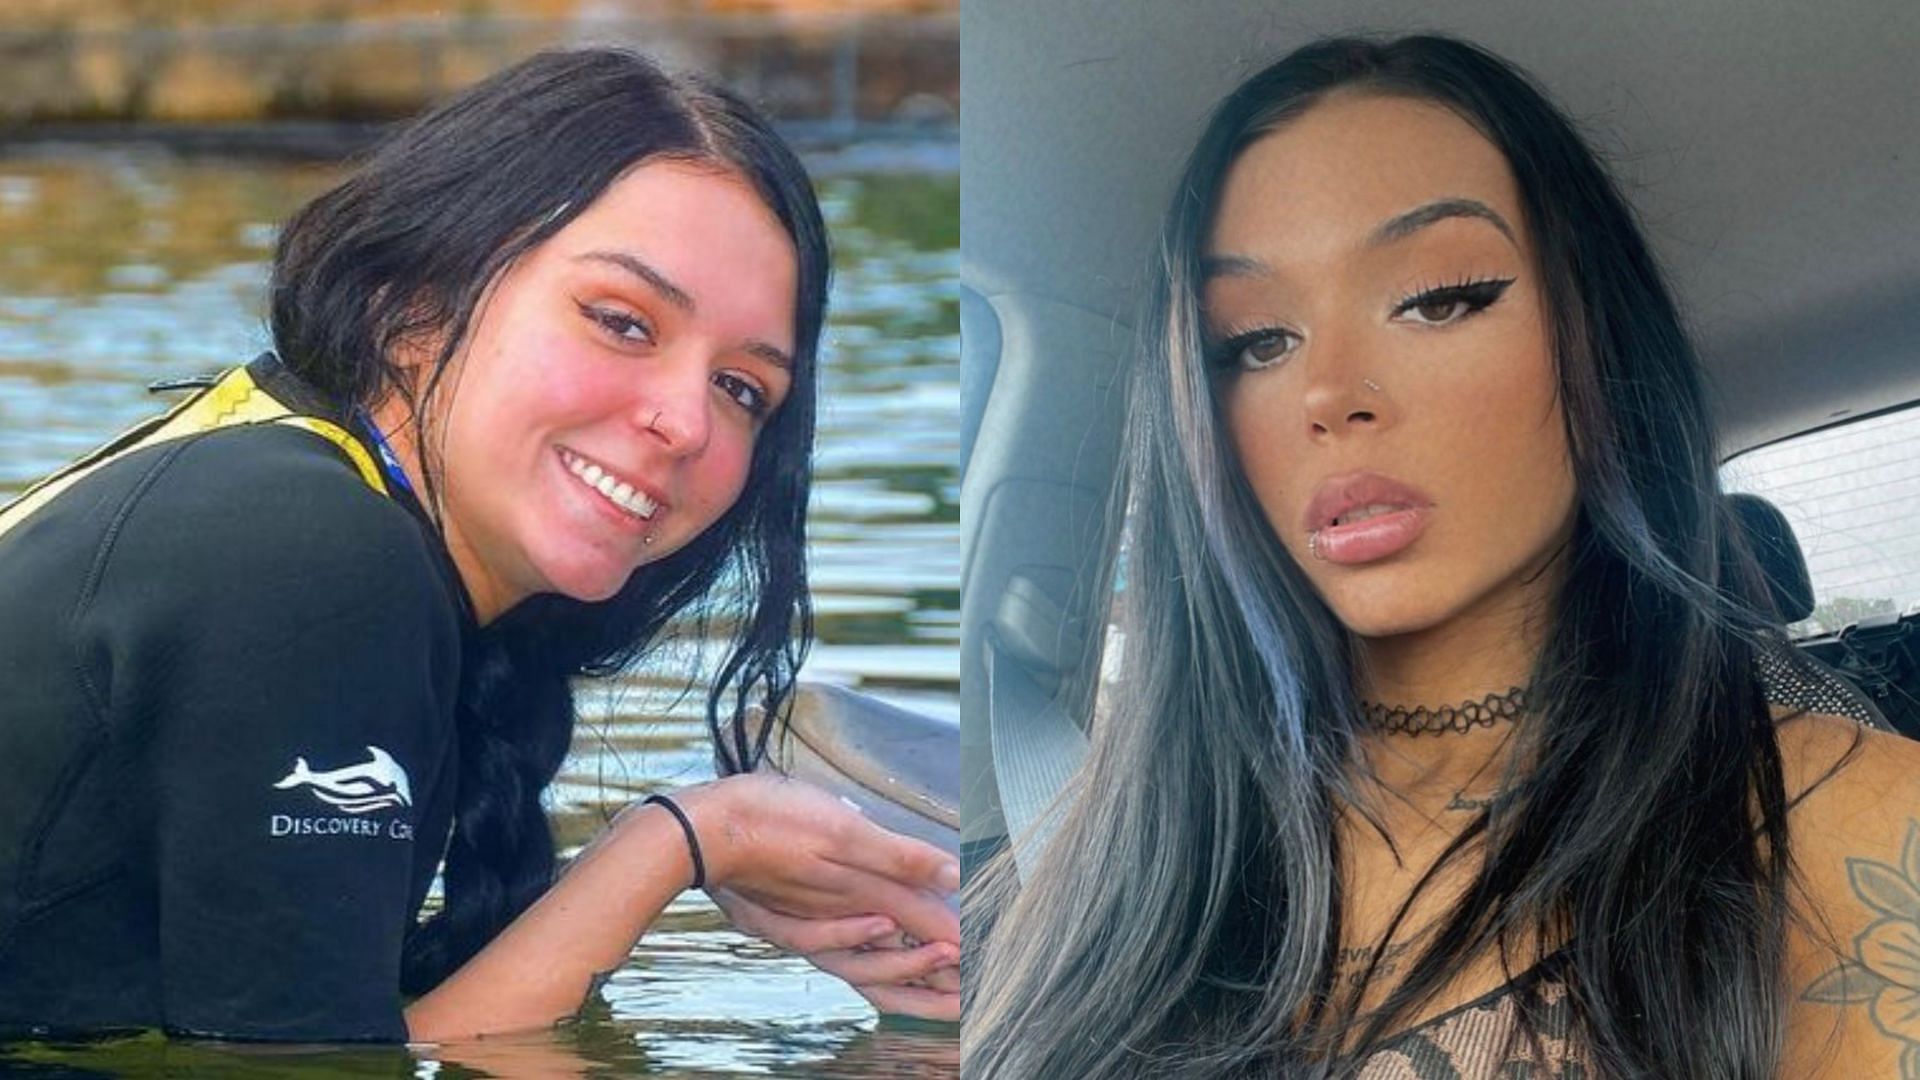 Cora Jade without makeup (left) and with makeup (right)